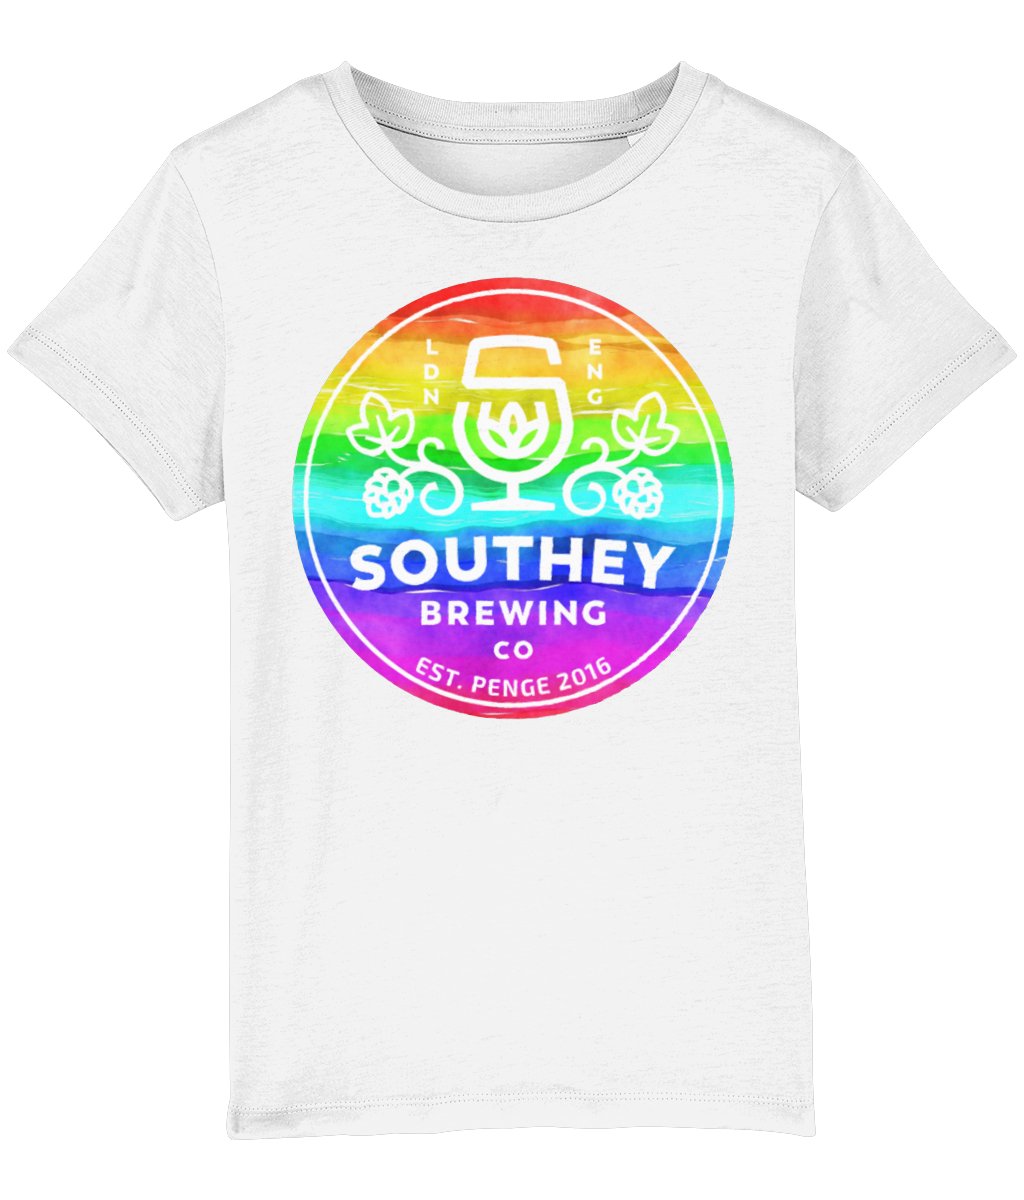 Child's Rainbow Logo T-shirt - Southey Brewery Co.